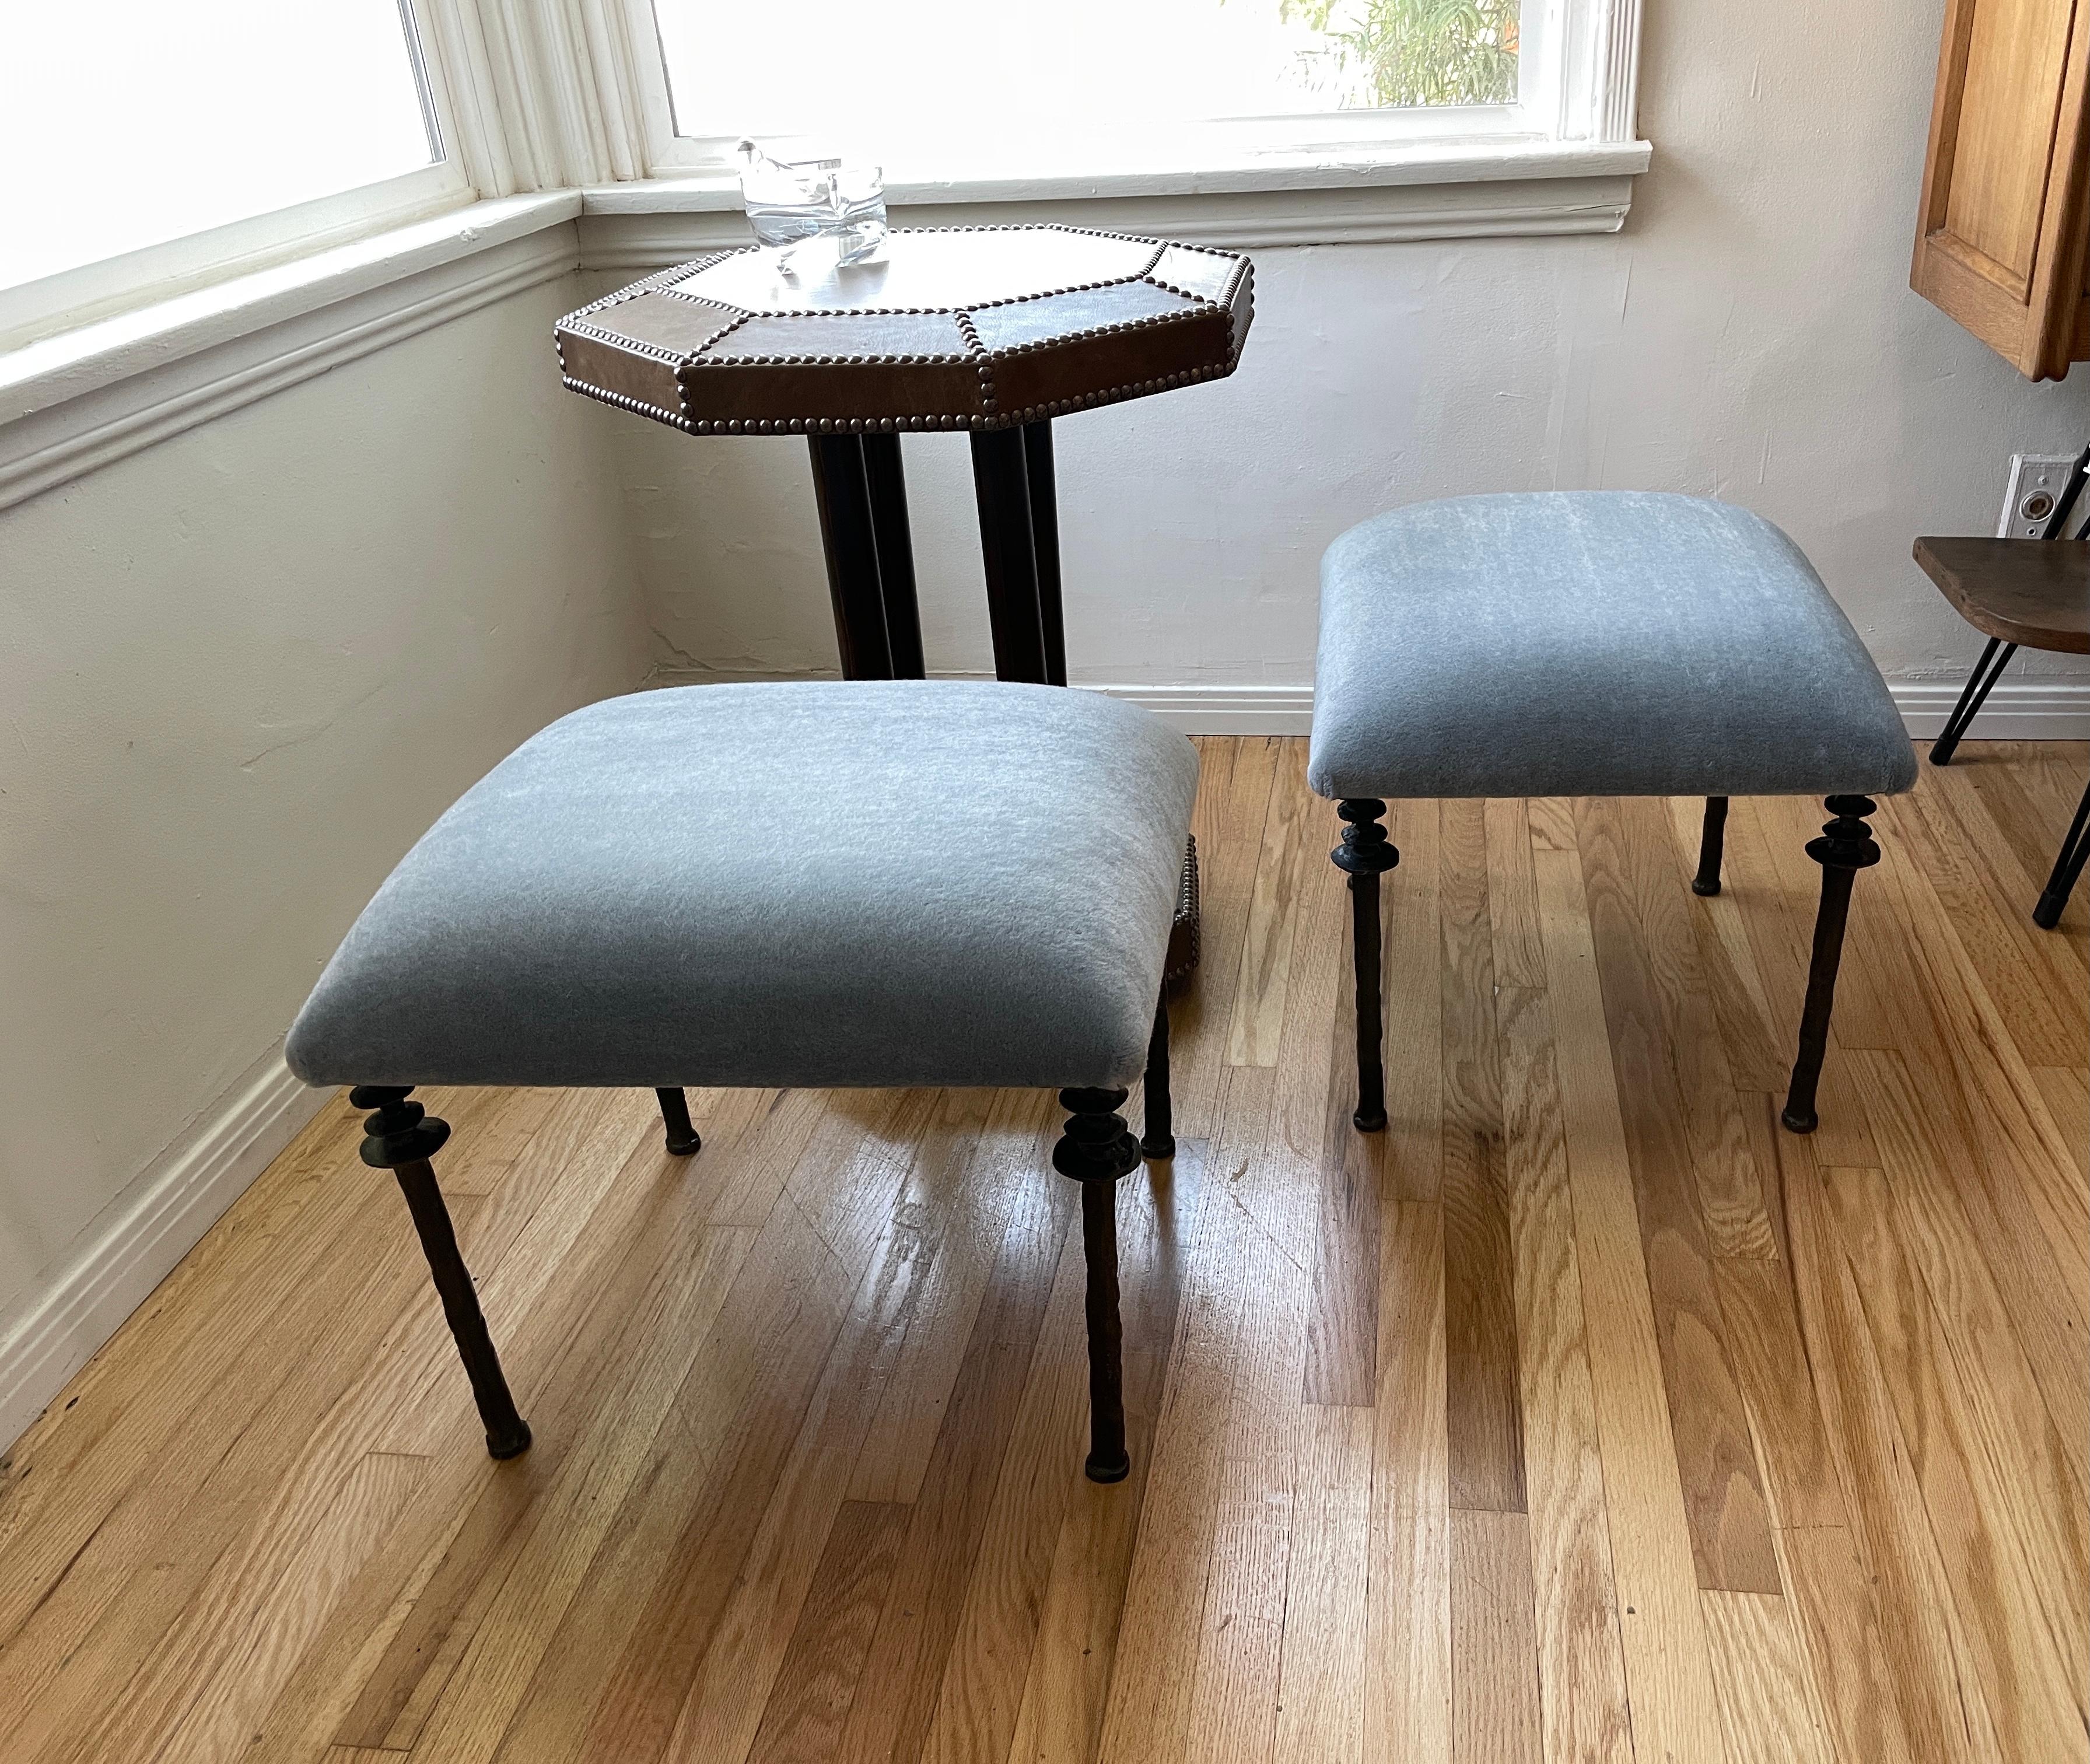 Pair of Sorgue Stools, by Bourgeois Boheme Atelier, Blue Mohair Upholstery 1